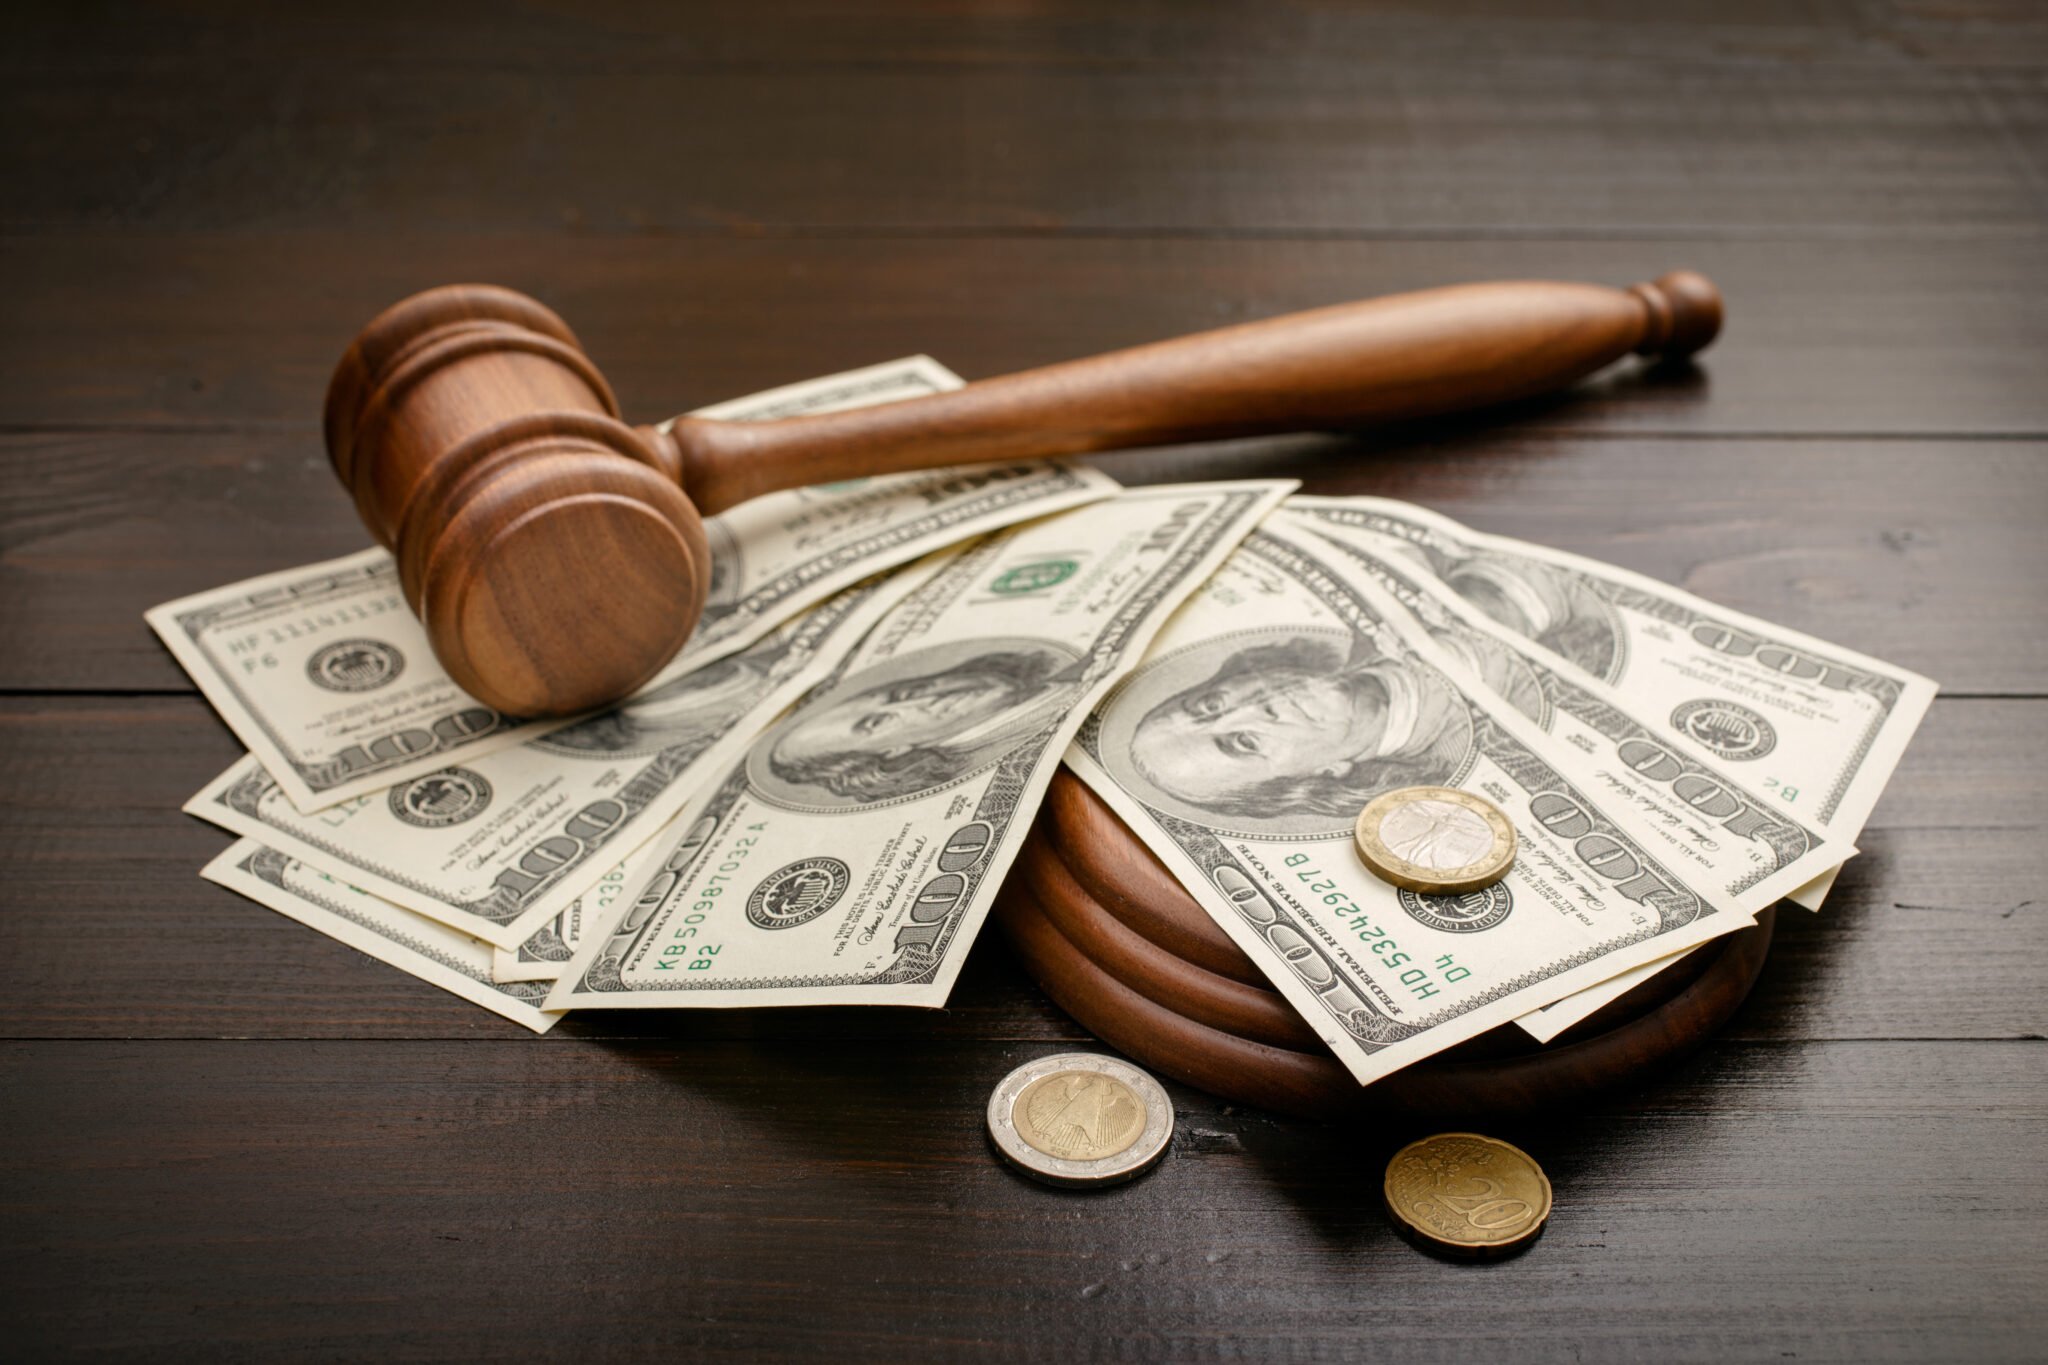 Gavel with dollars and cents